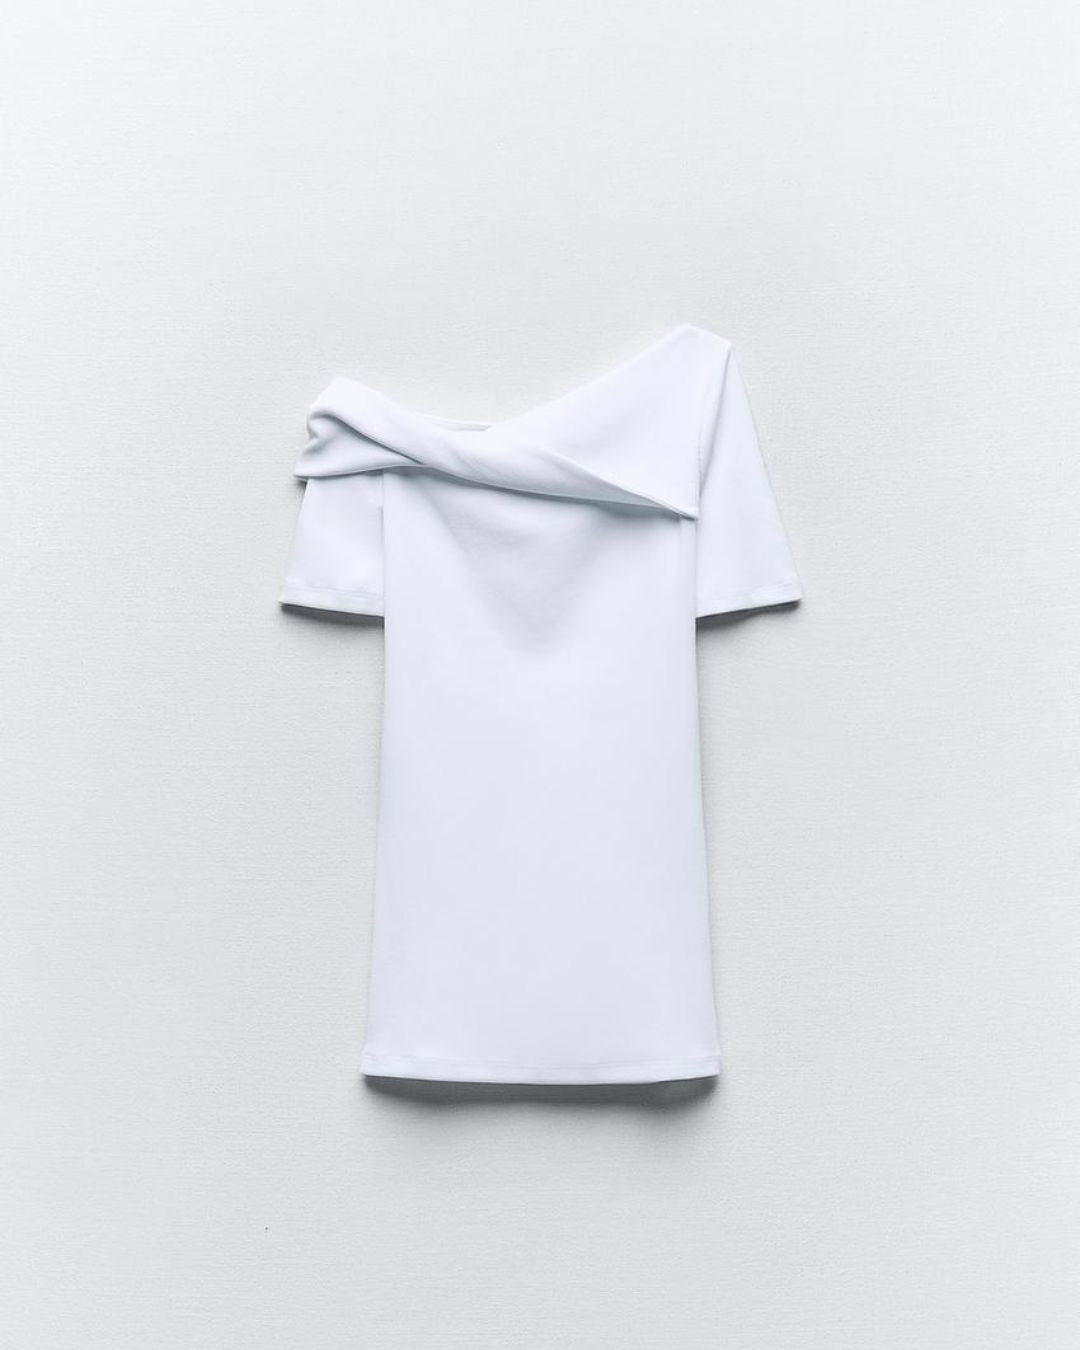 RUCHED ASYMMETRICAL TOP,bodycon, casual, cotton, knitted, one shoulder, regular, short sleeves, skinny fit, solid, spandex, stretchable, summer, tops, topwear, twisted, twisted neck, white,ruched-asymmetrical-top-white,Color- White
Fabric- 96% Cotton 5% Spandex 
Type- Assymetrical Top
Fit- Skinny Fit
Length- Regular
Neck- Twisted Neck
Sleeves- Short Sleeves
Details- One Shoulder